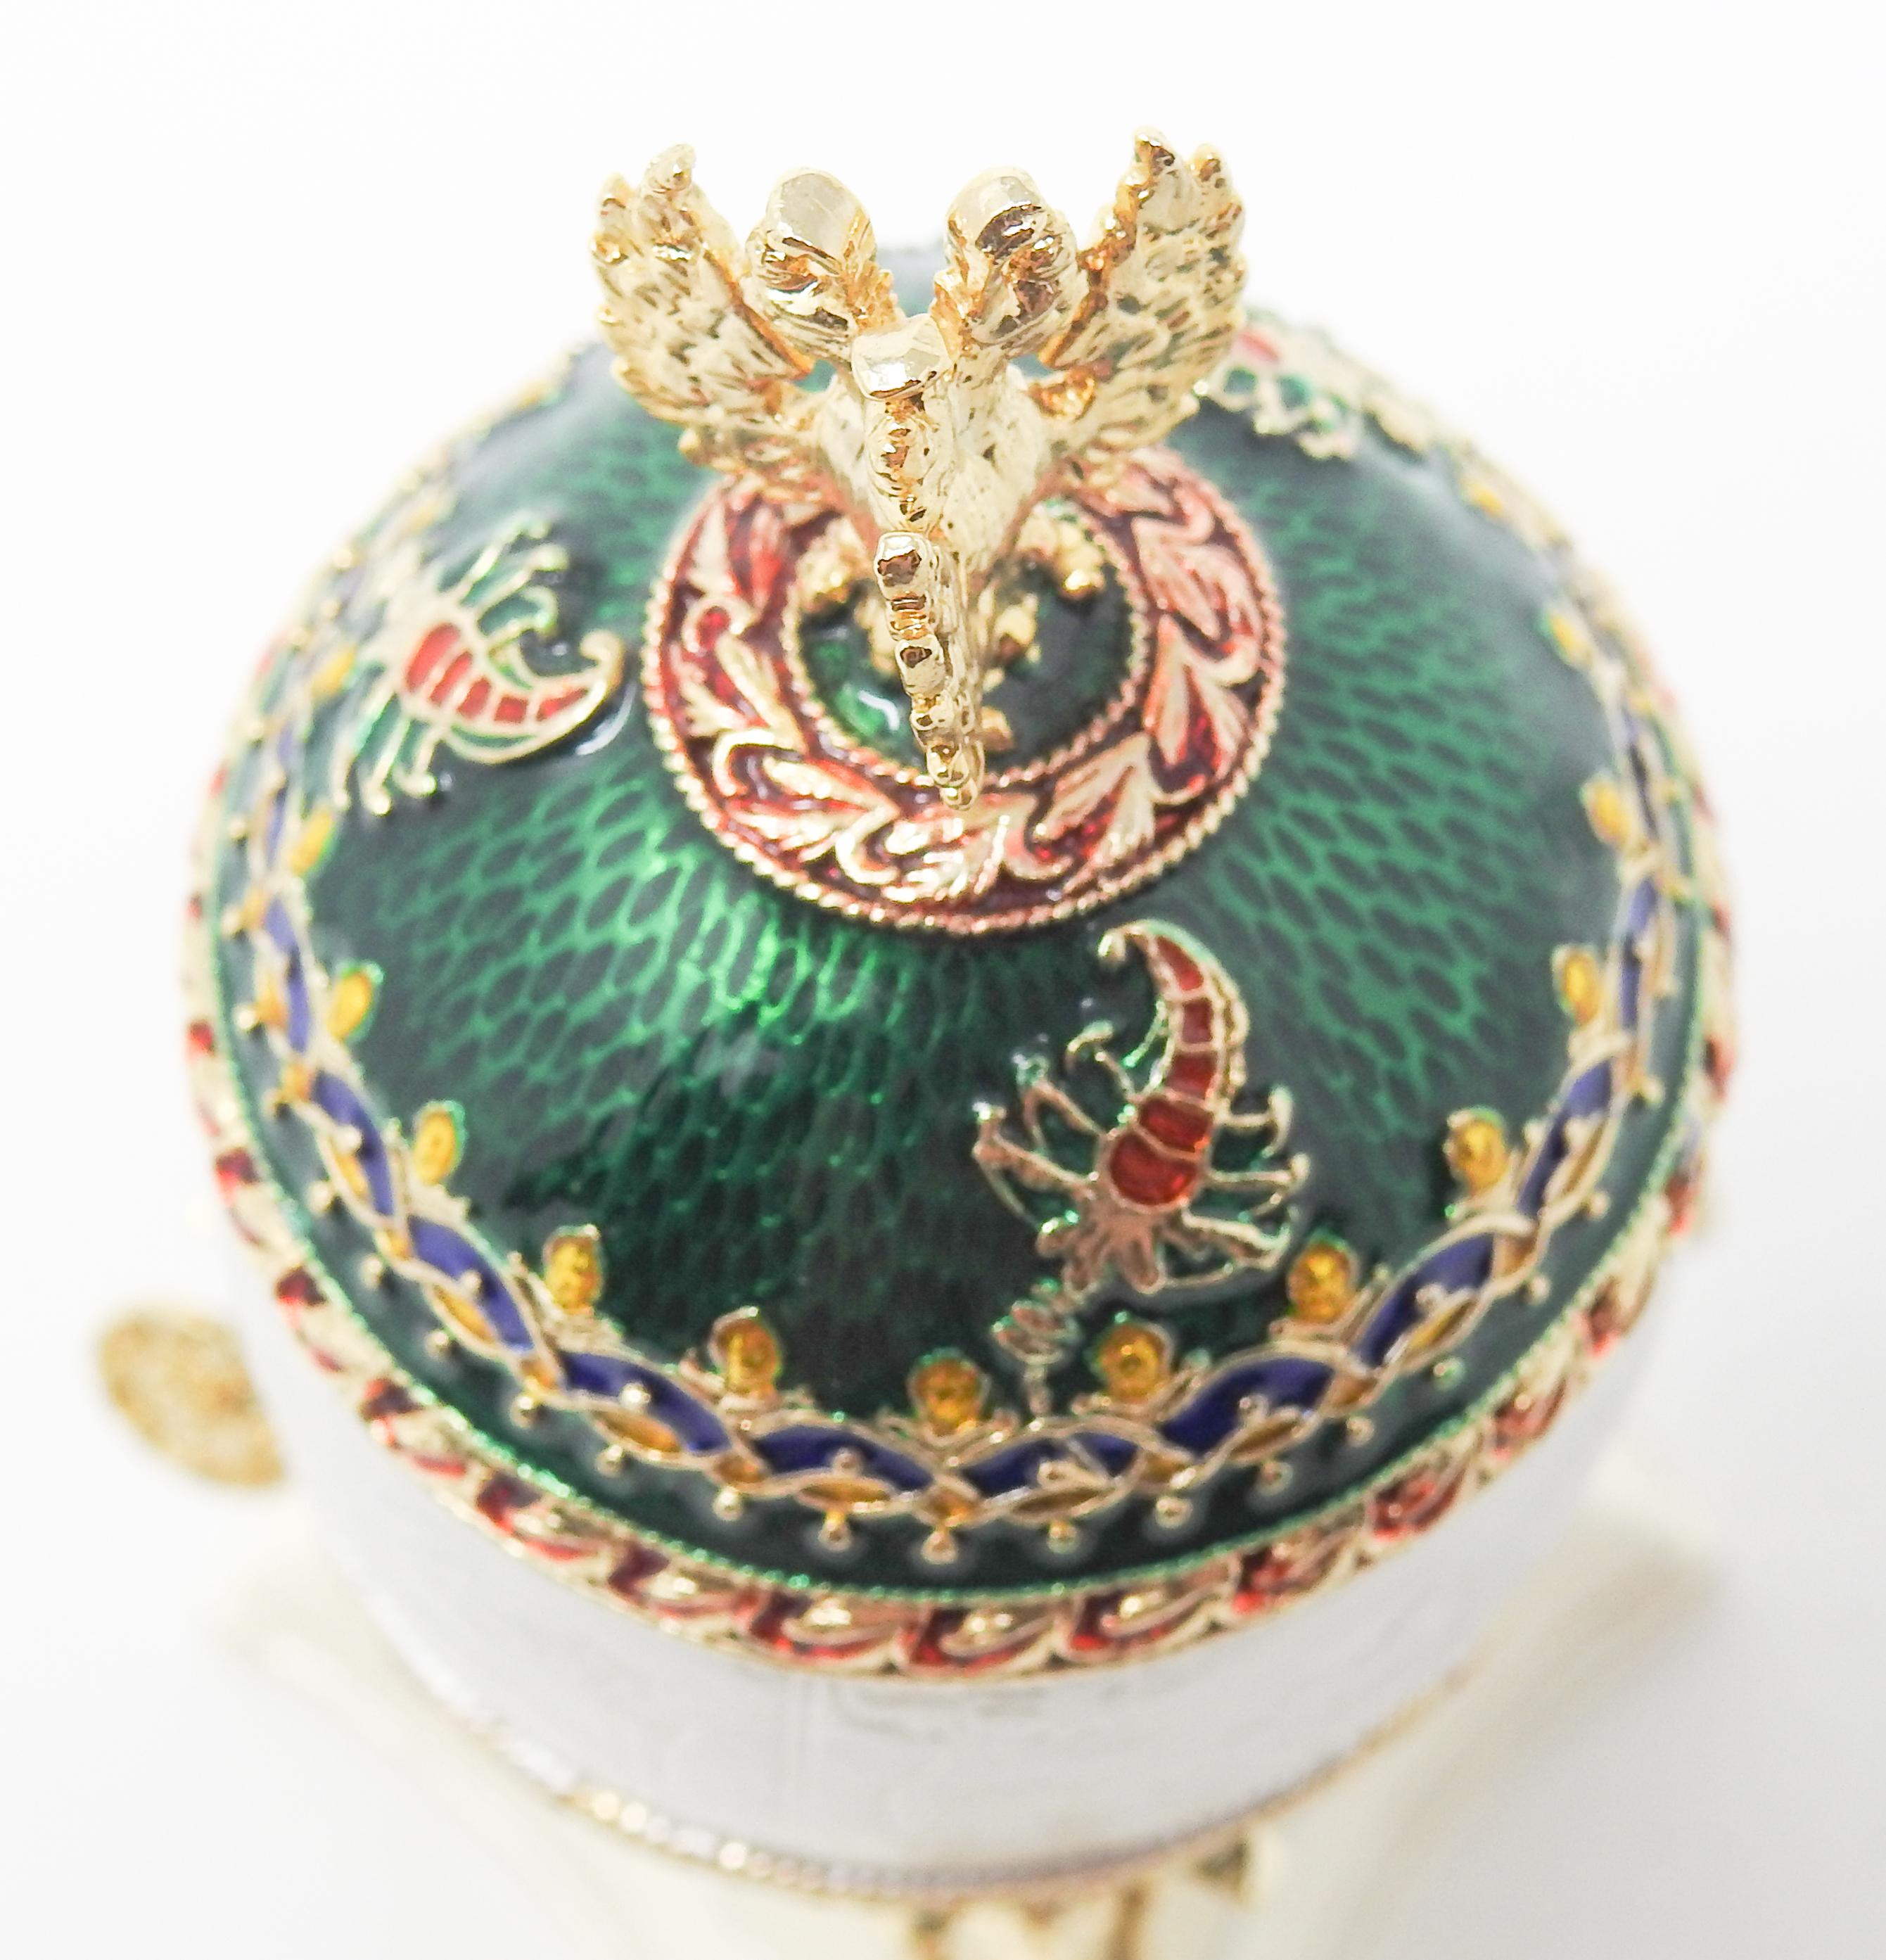 Metalwork Faberge Style Egg For Sale